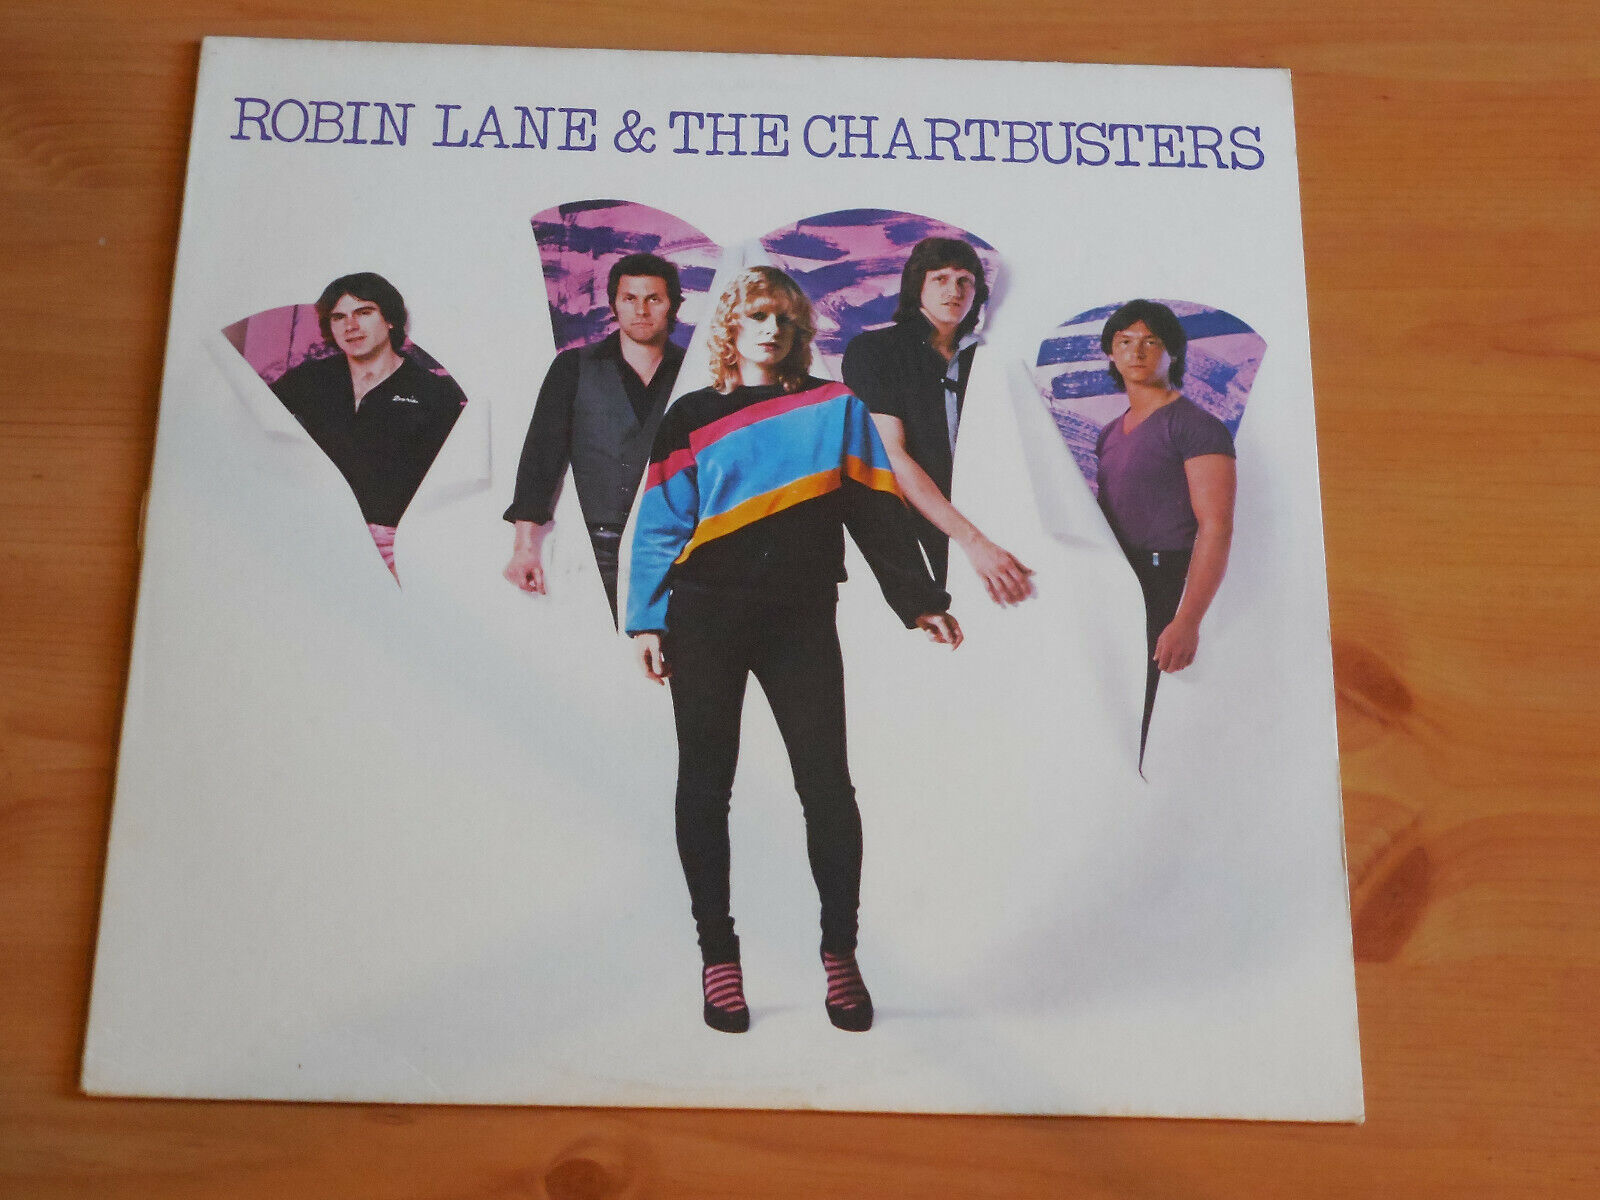 Robin Lane & The Chartbusters - 12 Inch Vinyl Record